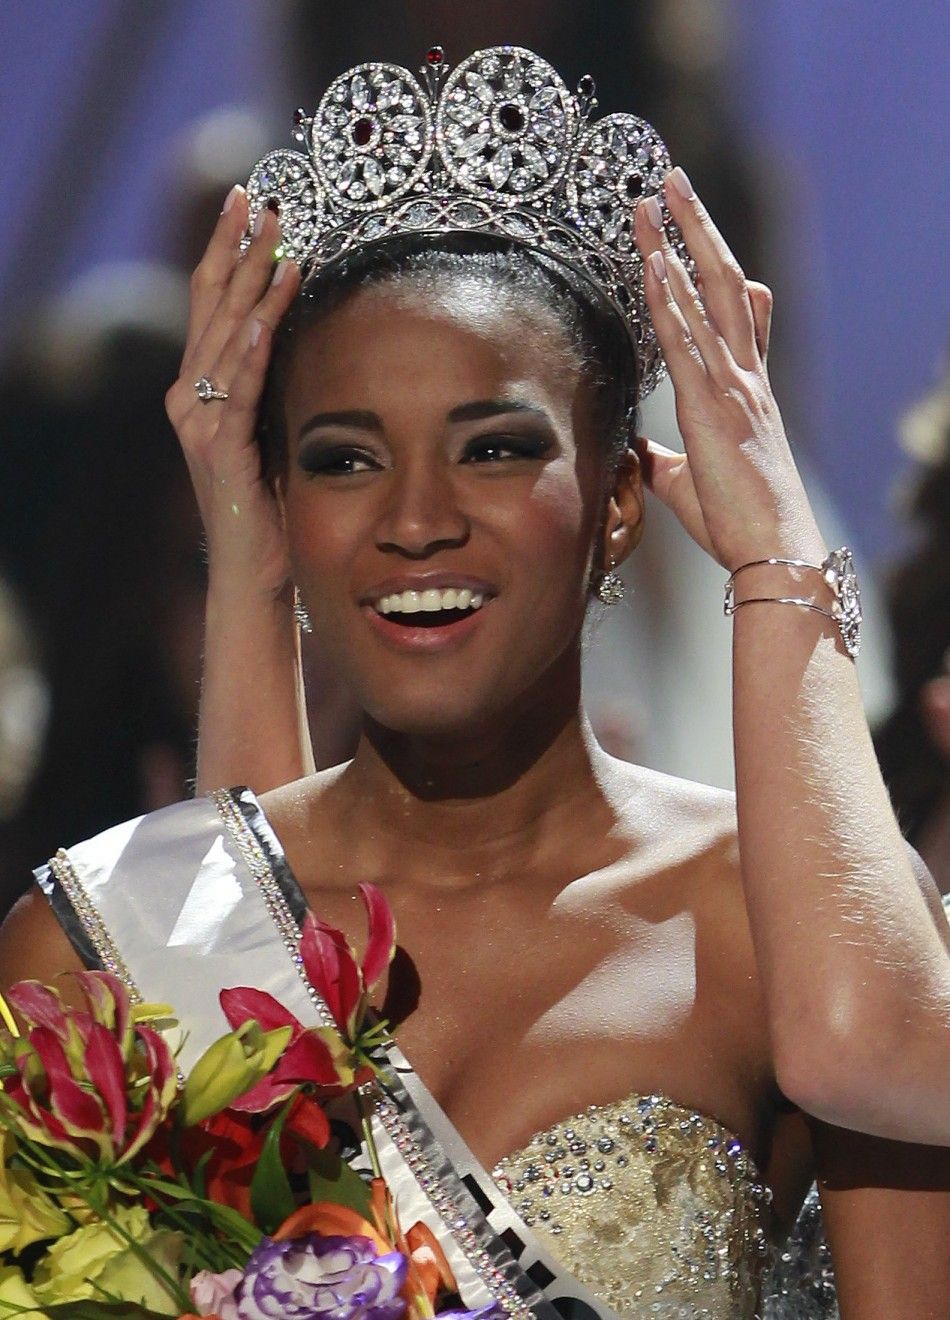 Miss Angola Leila Lopes is crowned by Miss Universe 2010 Ximena Navarrete of Mexico after being named Miss Universe 2011...